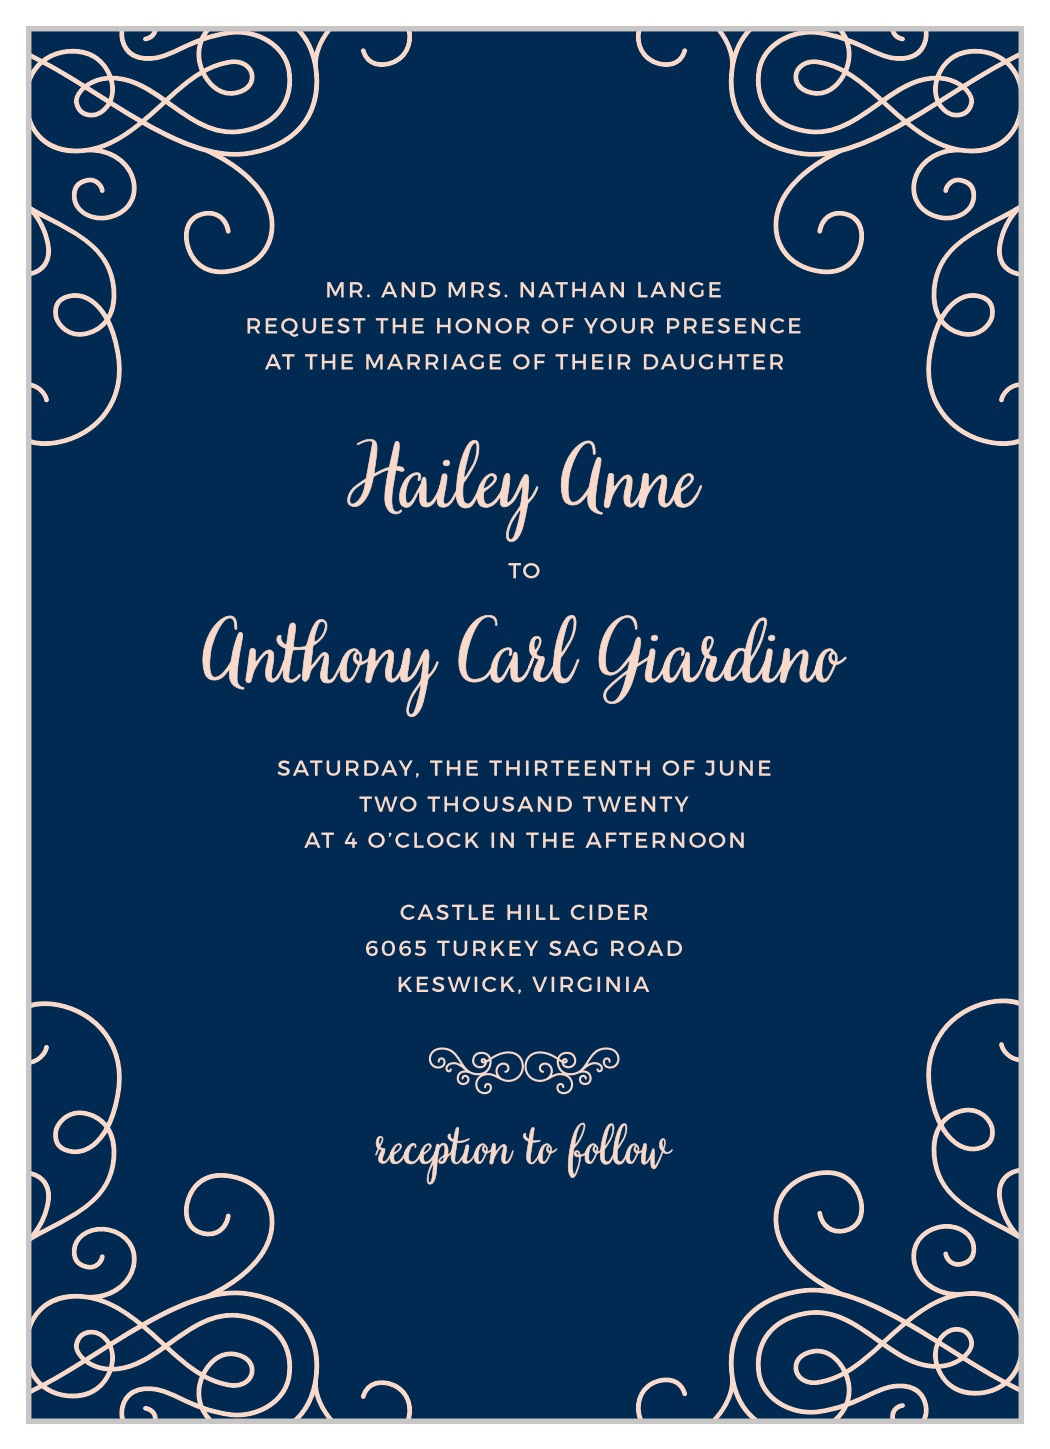 PERSONALISED WEDDING INVITATIONS RSVP WISHING WELL CARDS SET purple silver white 